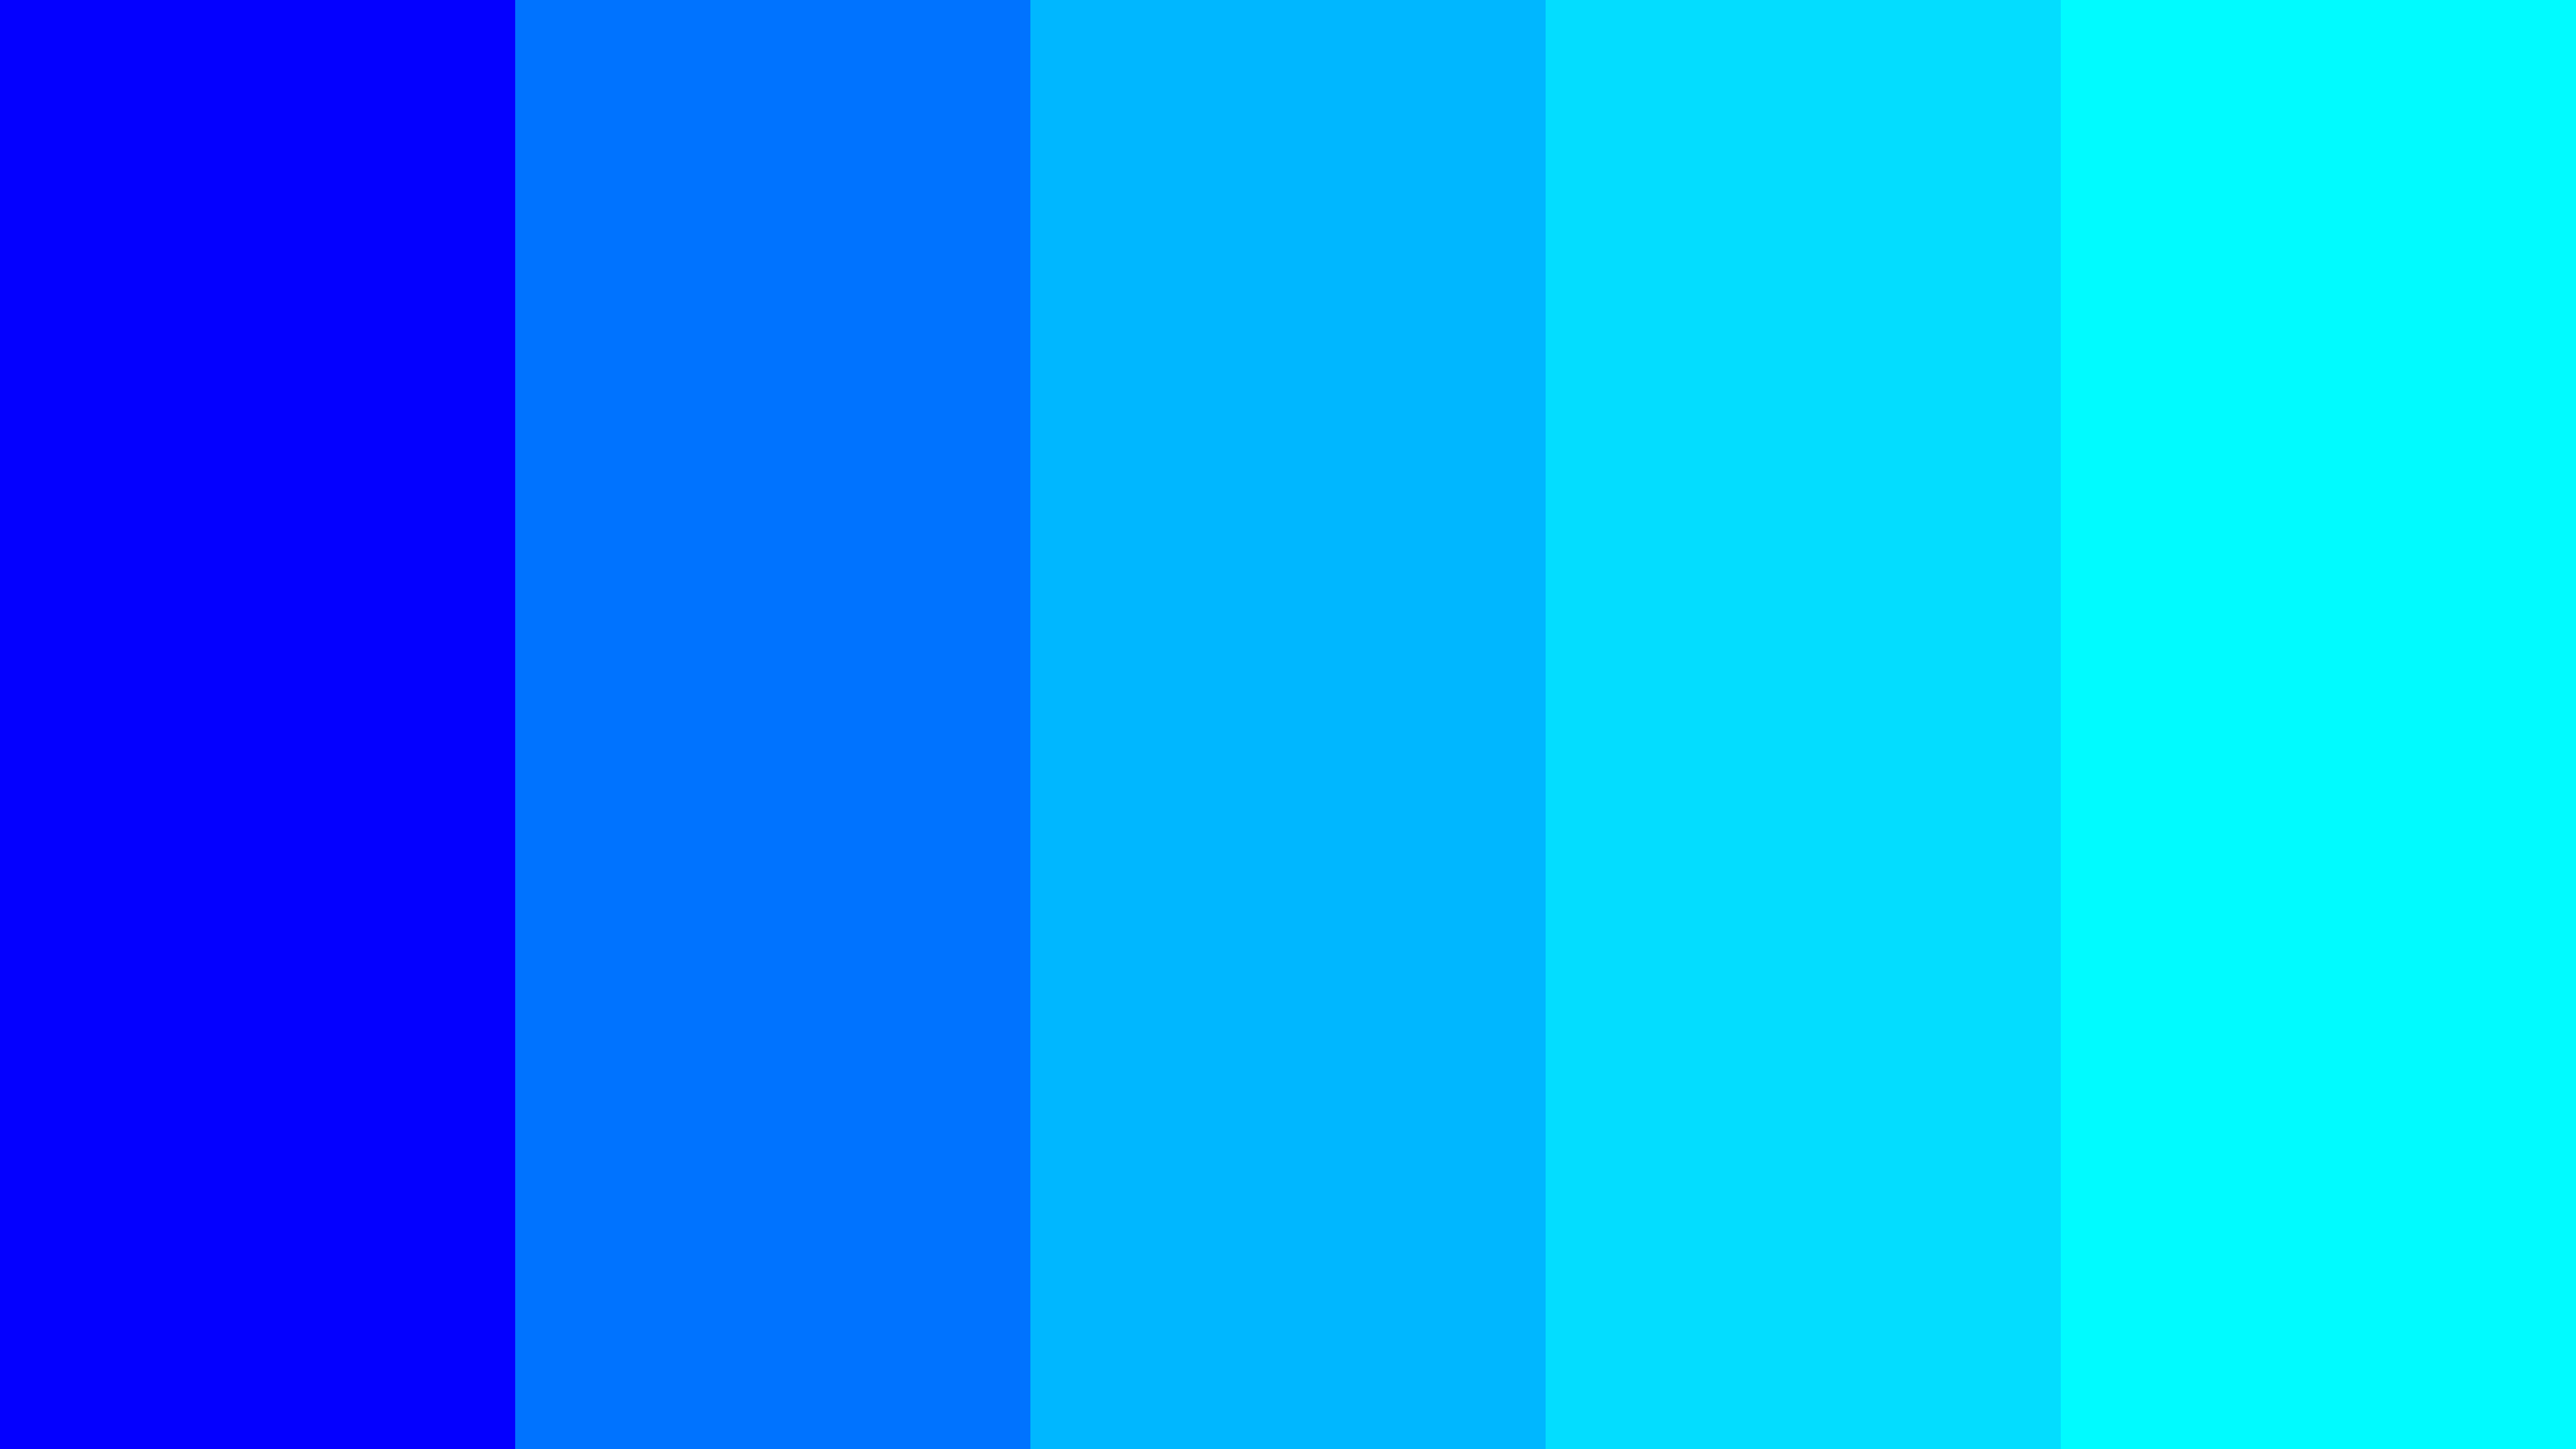 What is the color of Cyan Azure?